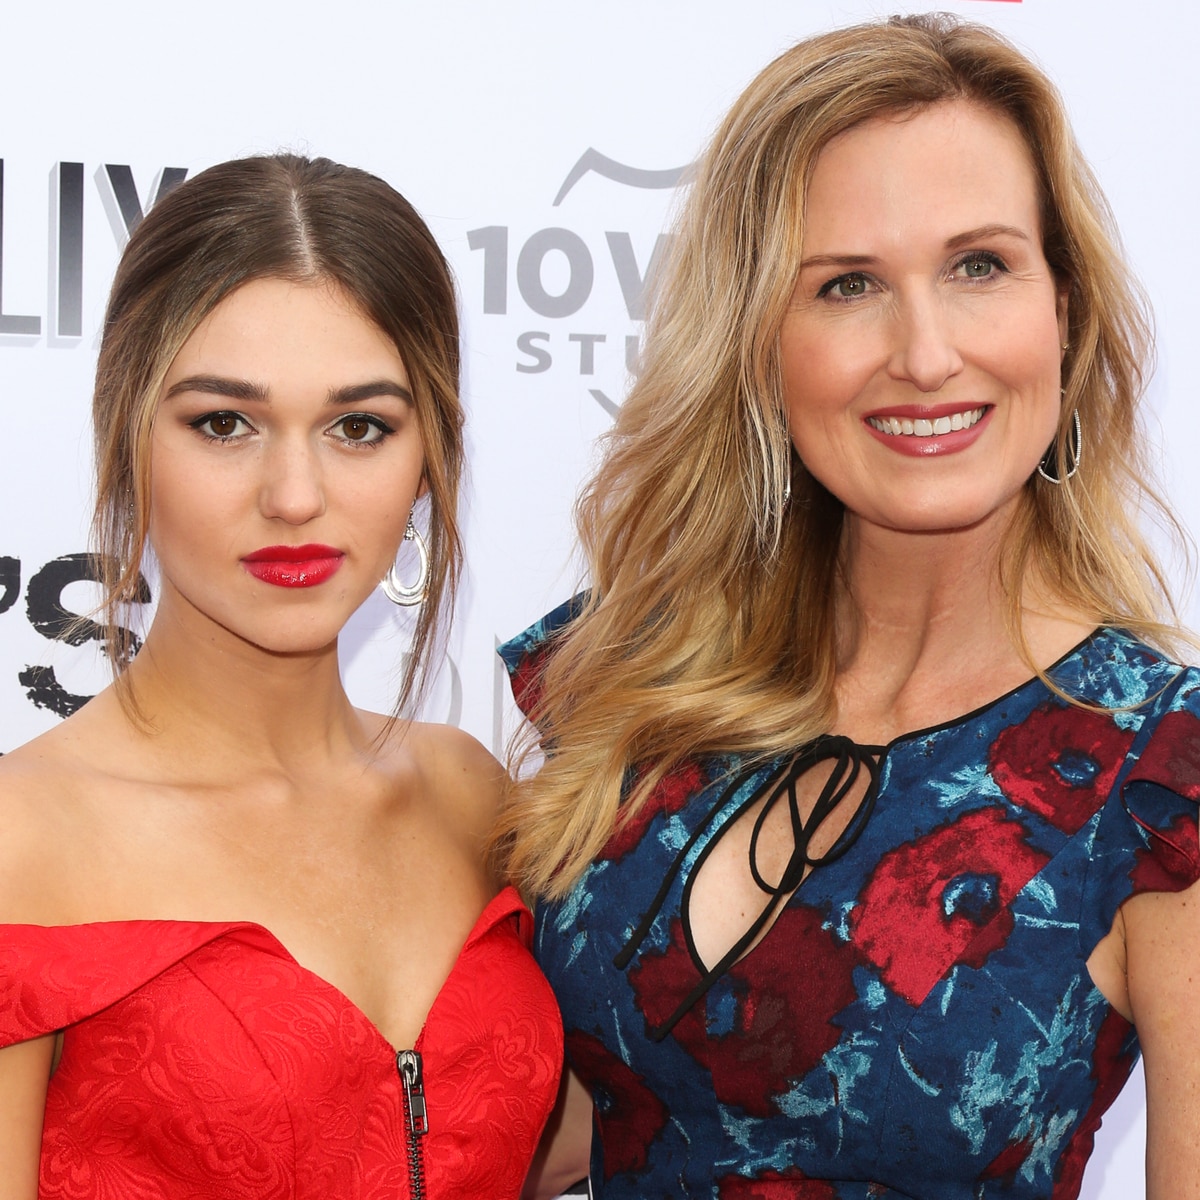 Where Sadie and Korie Robertson Stand With Phils Secret Daughter - E! Online